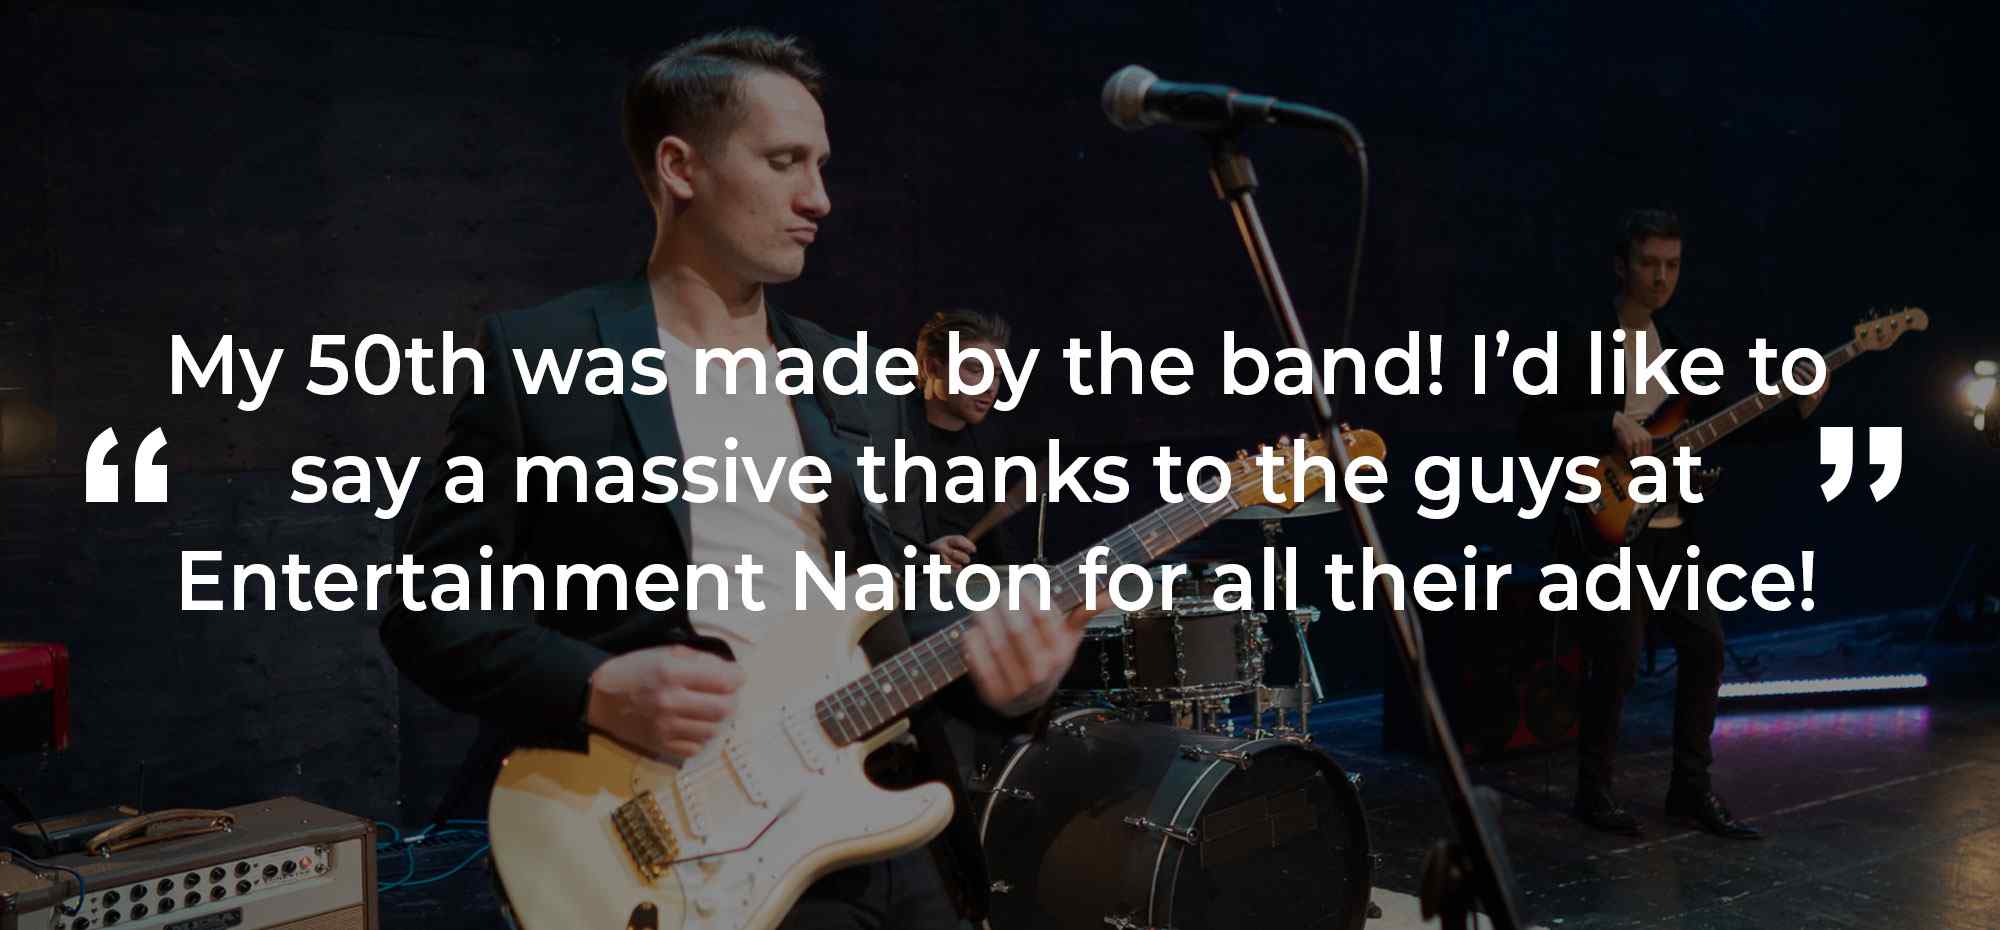 Client Review of a Party Band Cheshire